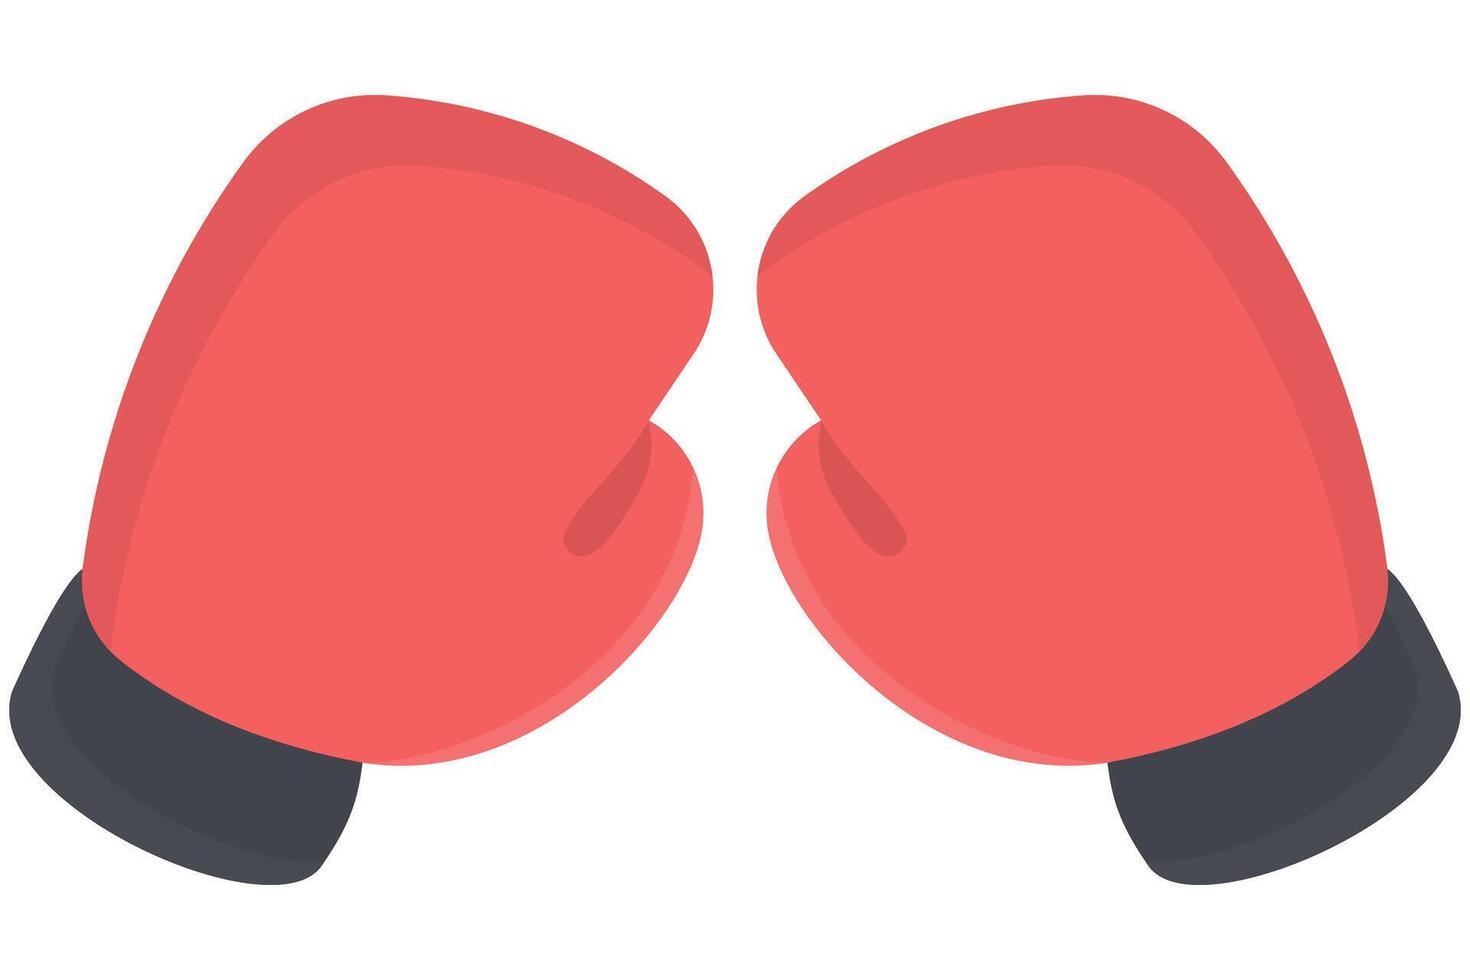 boxing gloves flat icon isolated on white background. vector